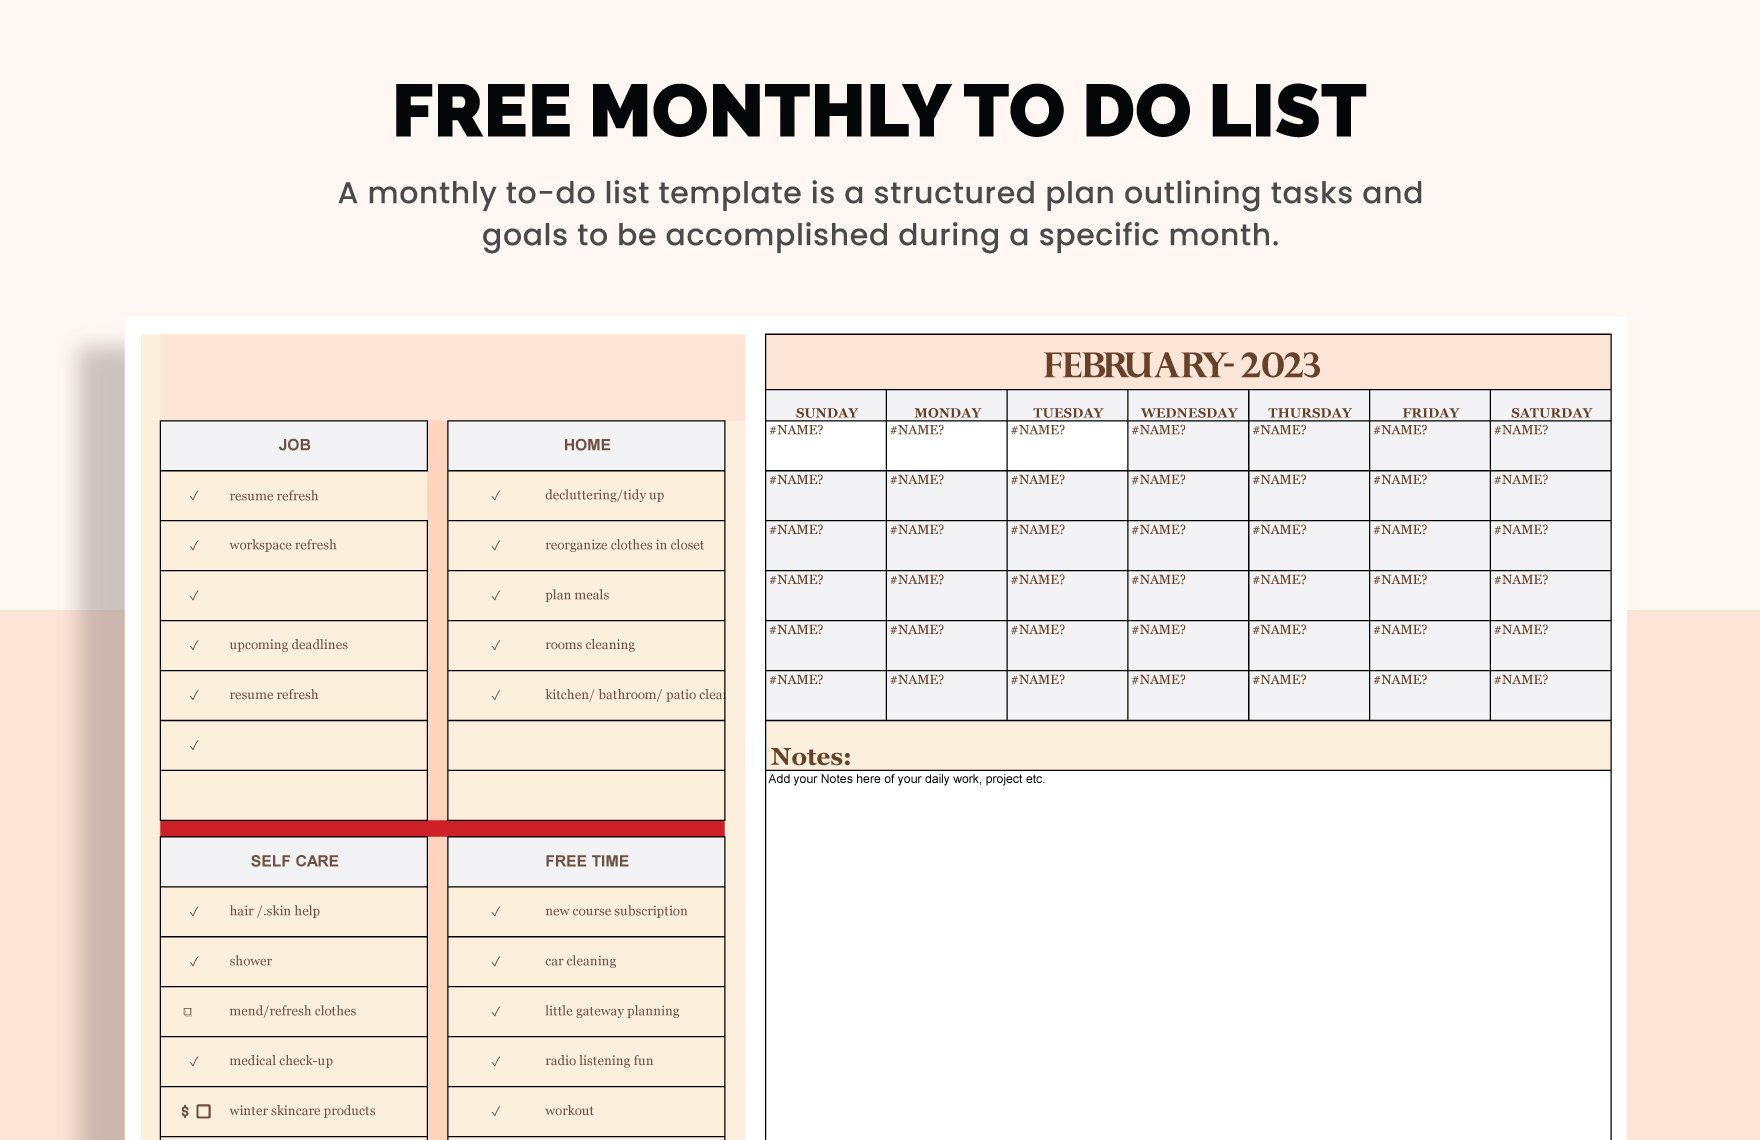 free-monthly-to-do-list-download-in-excel-google-sheets-template